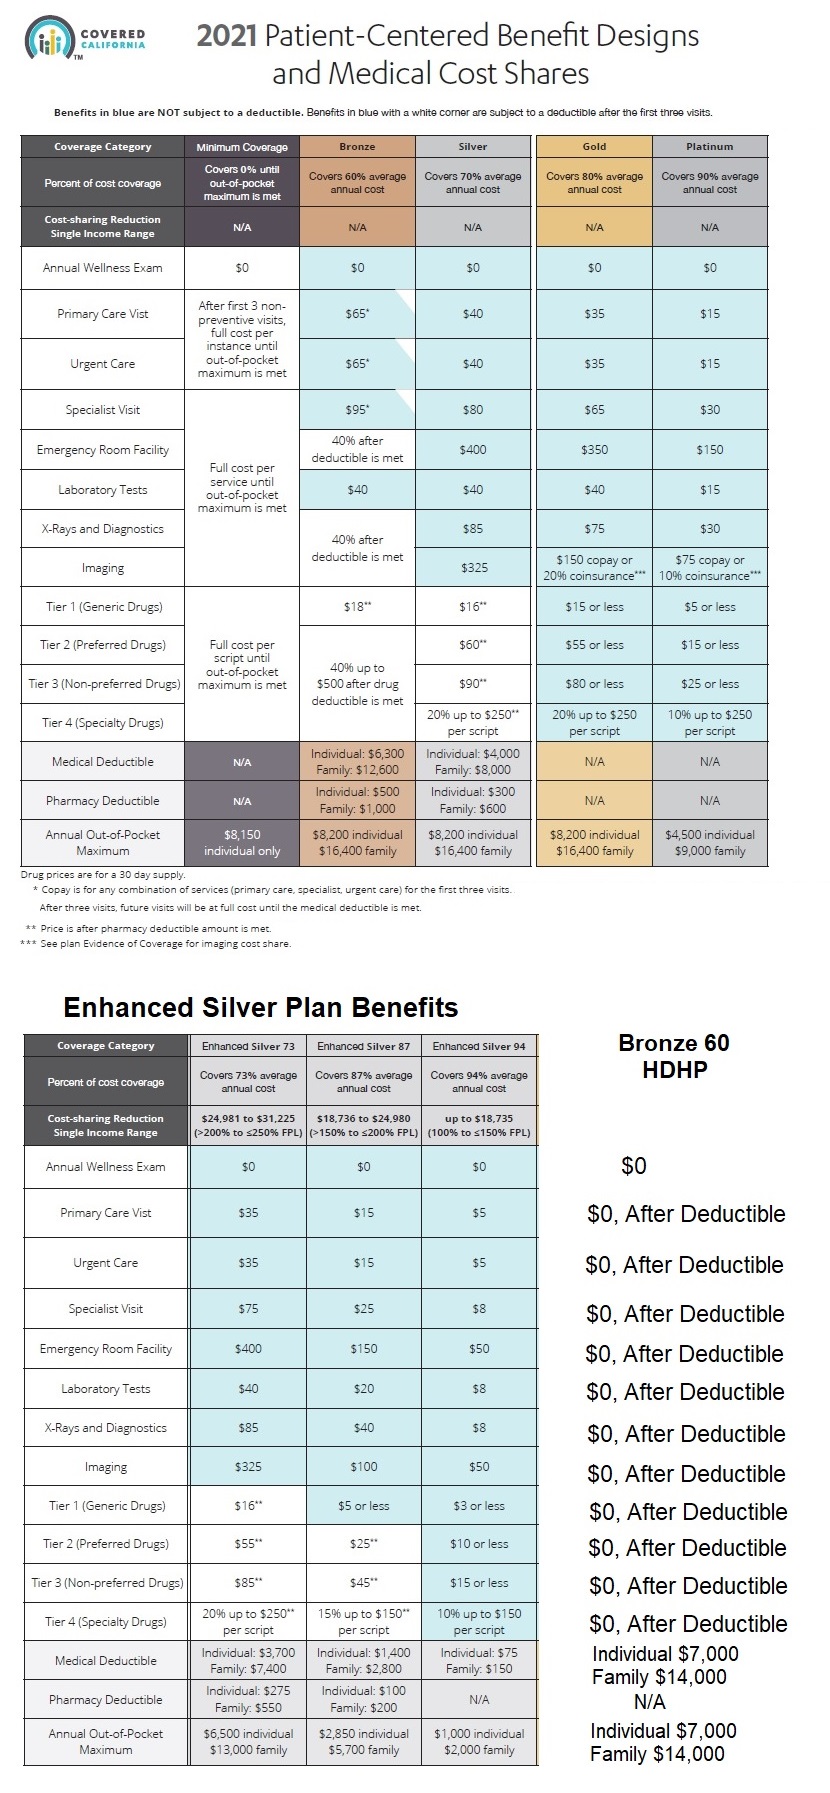 Covered California standard benefit plan design summary for metal tiers Bronze - Platinum for 2021.